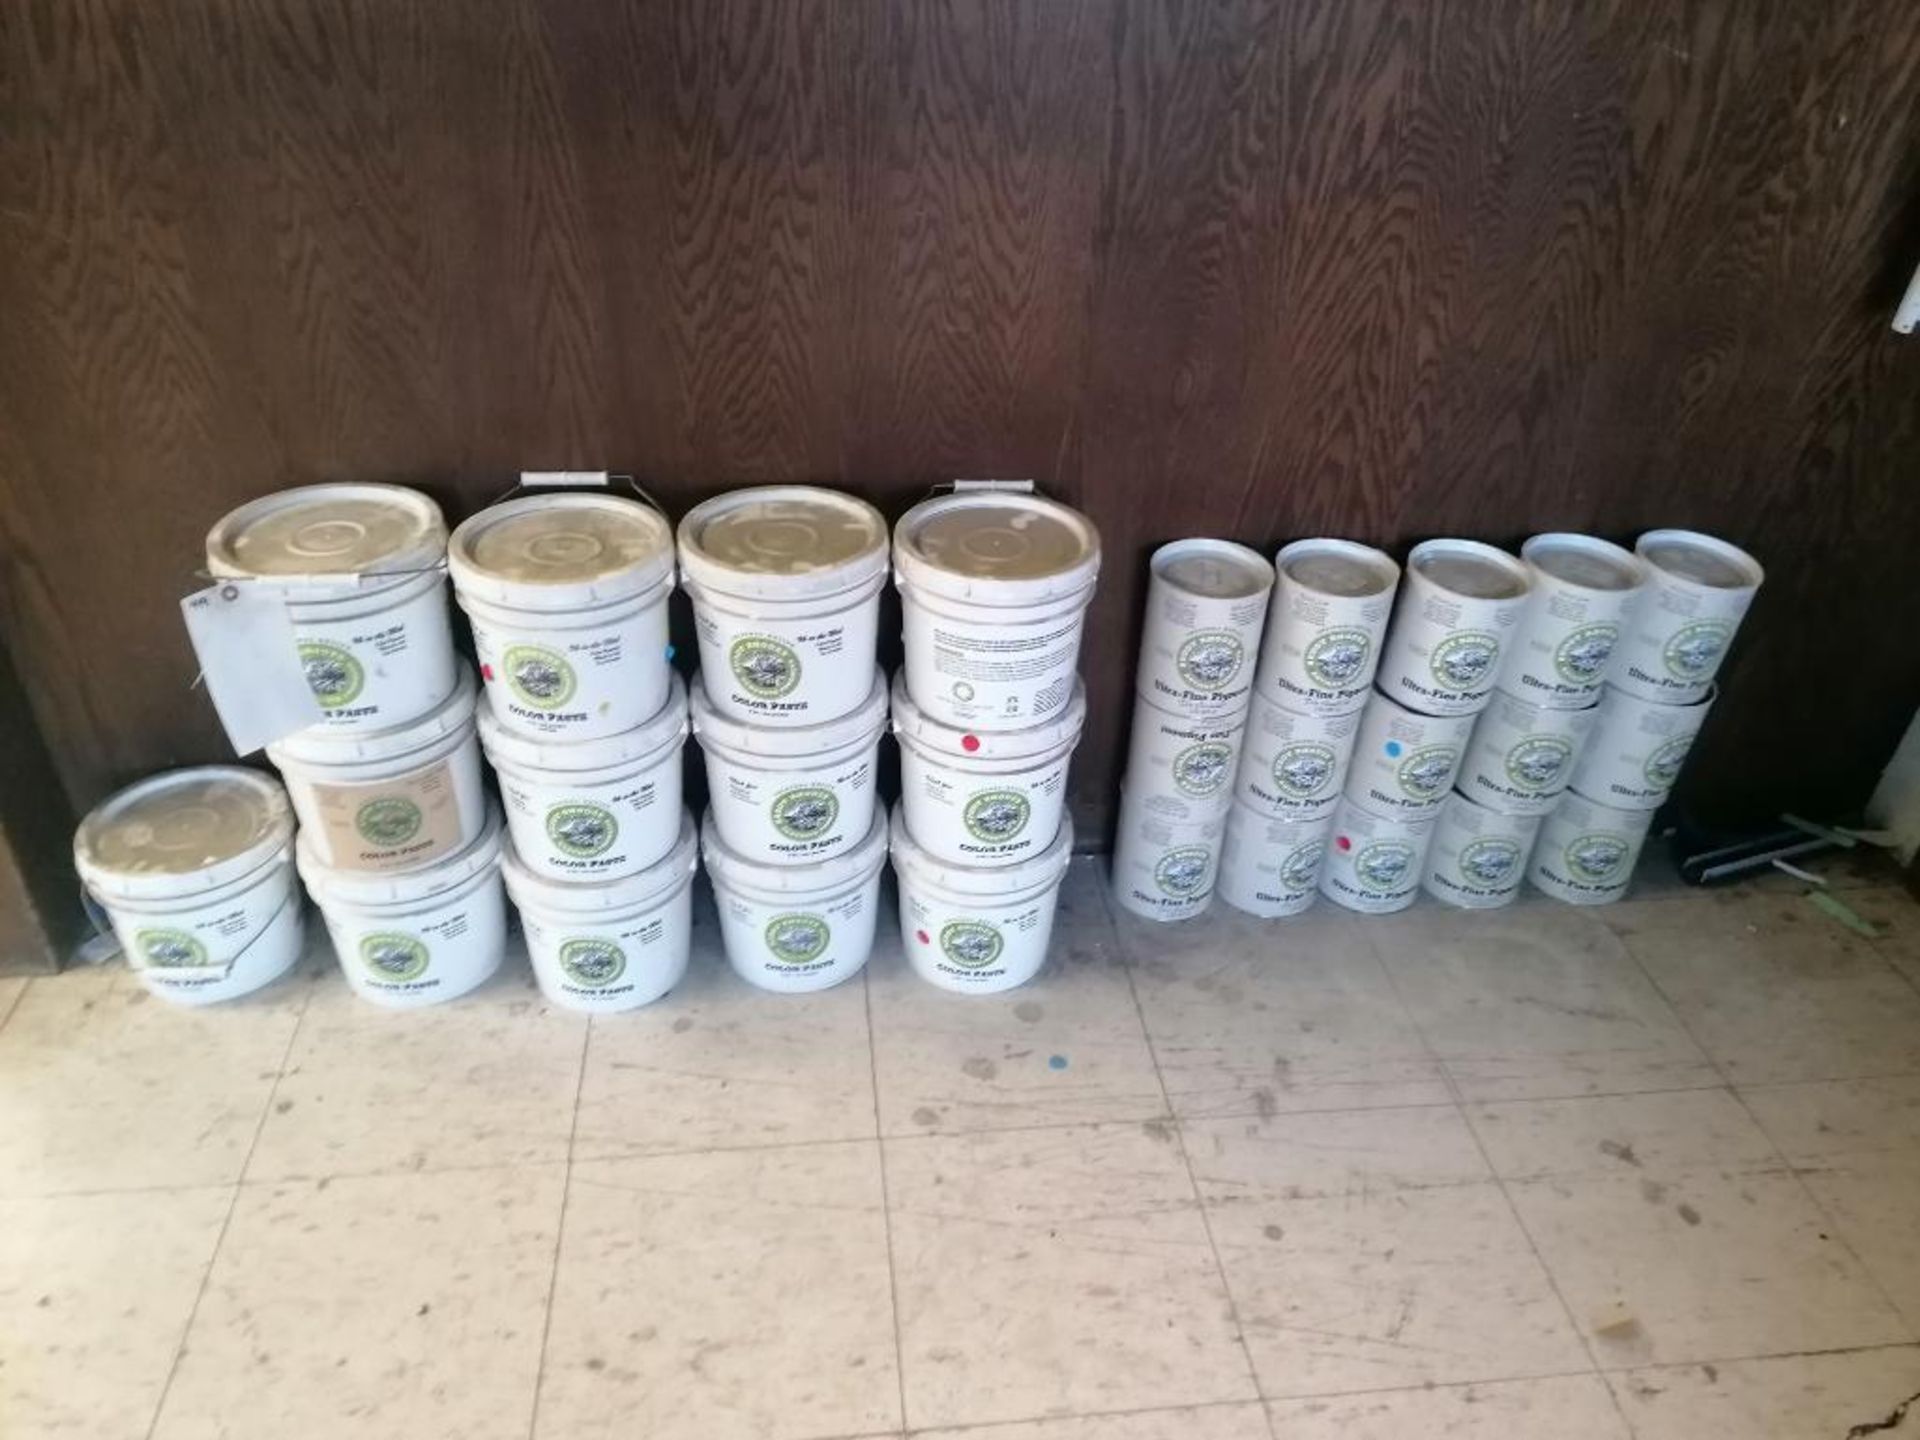 (13) 8LBS Buckets of Buddy Rhodes Color Paste & (15) 2 LBS Cans of Buddy Rhodes Ultra-Fine Pigment